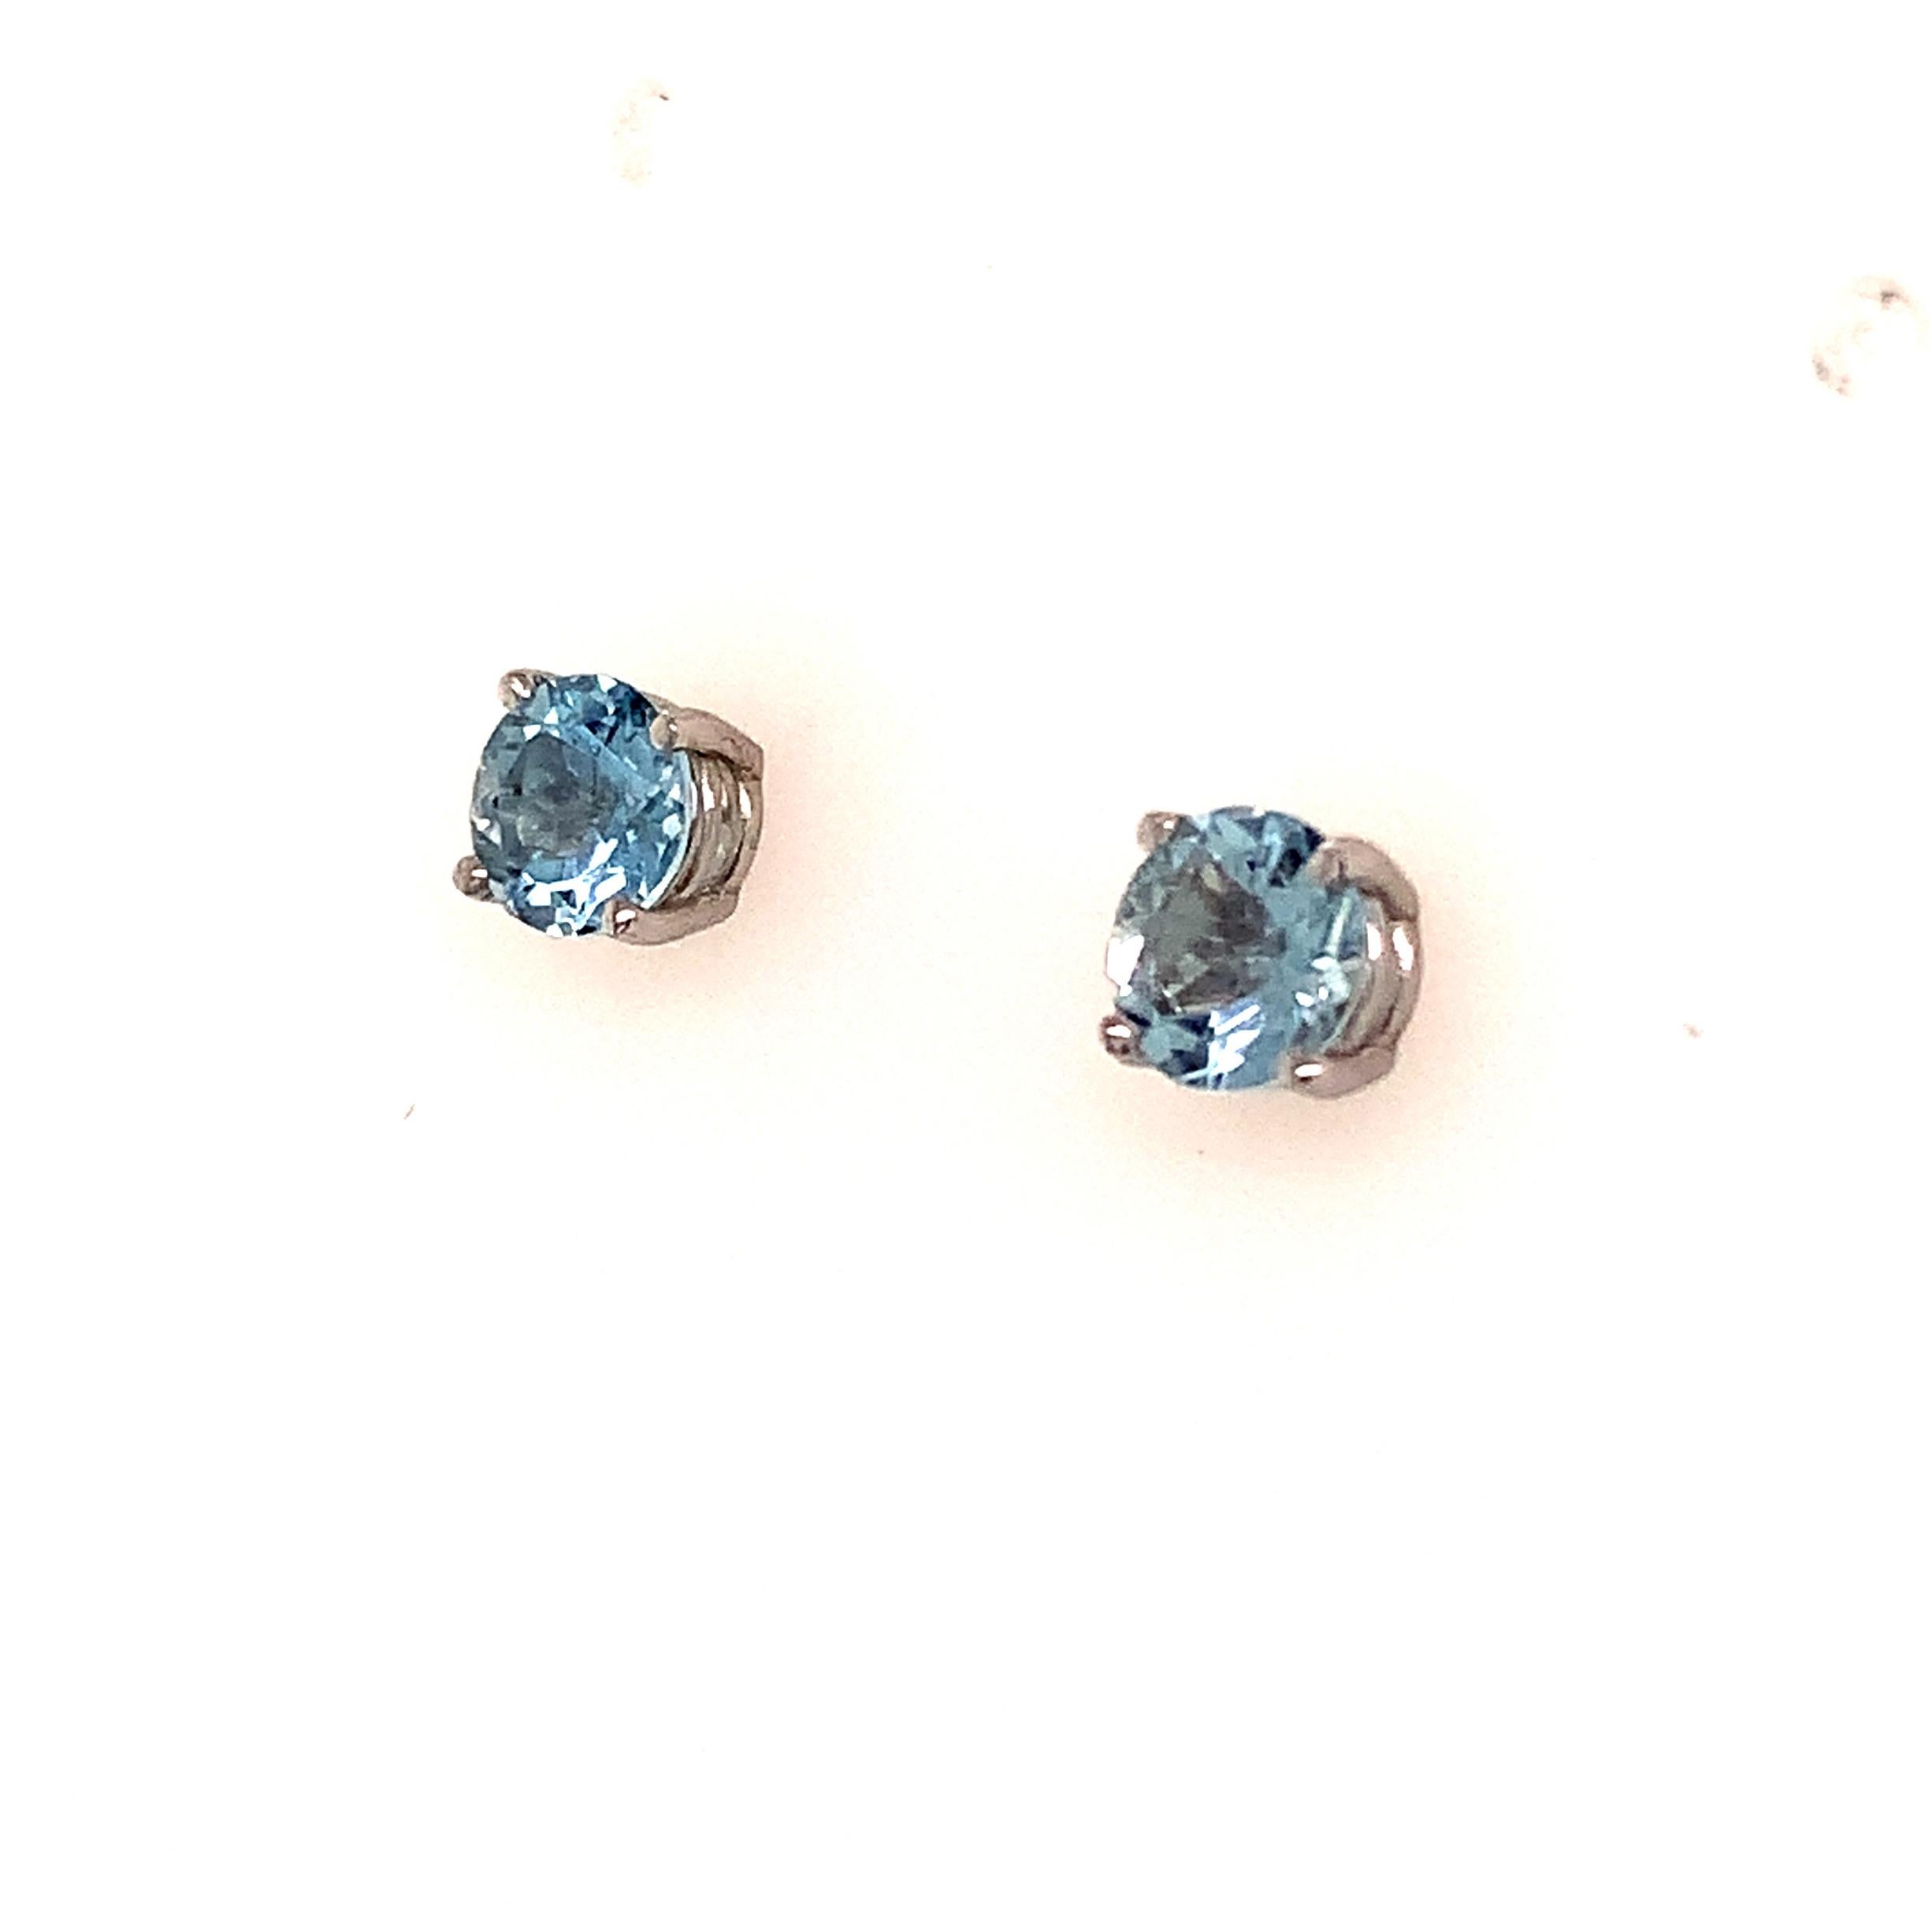 Mixed Cut Natural Aquamarine Stud Earrings 14Karat White Gold 1.0 TCW Certified For Sale